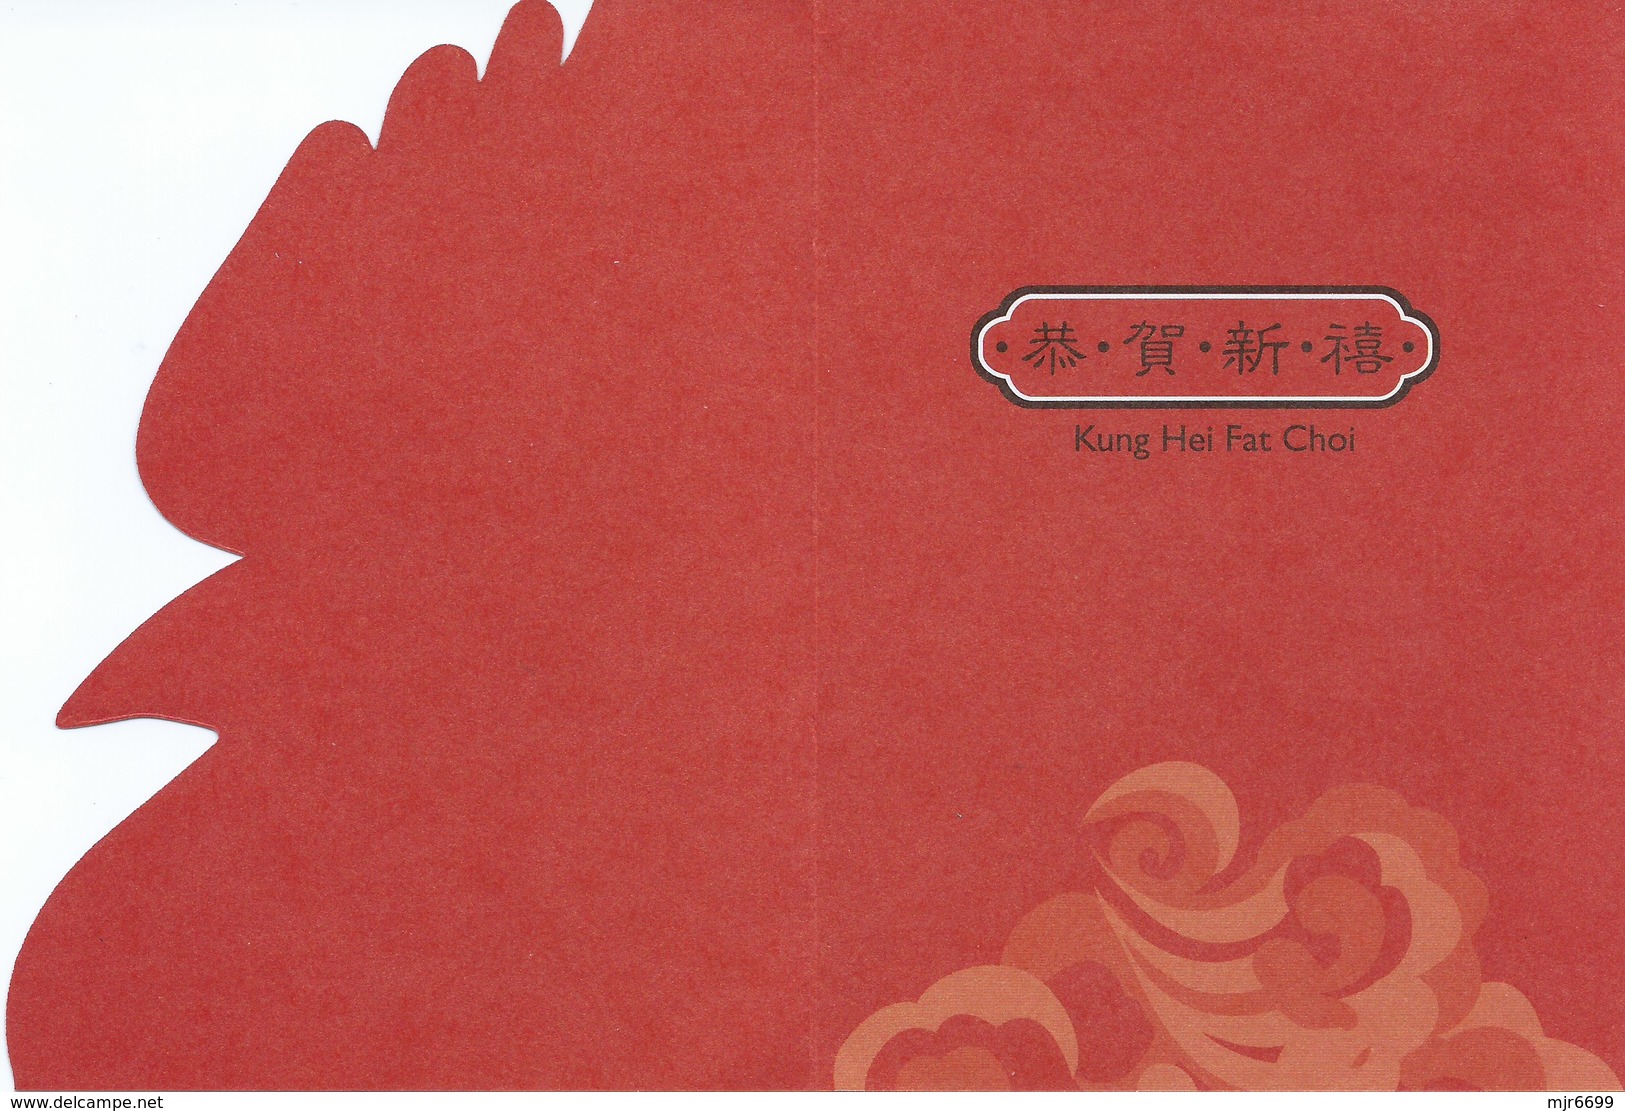 MACAU 2005 LUNAR NEW YEAR OF THE COCK GREETING CARD & POSTAGE PAID COVER, POST OFFICE CODE #BPD008 - Postal Stationery